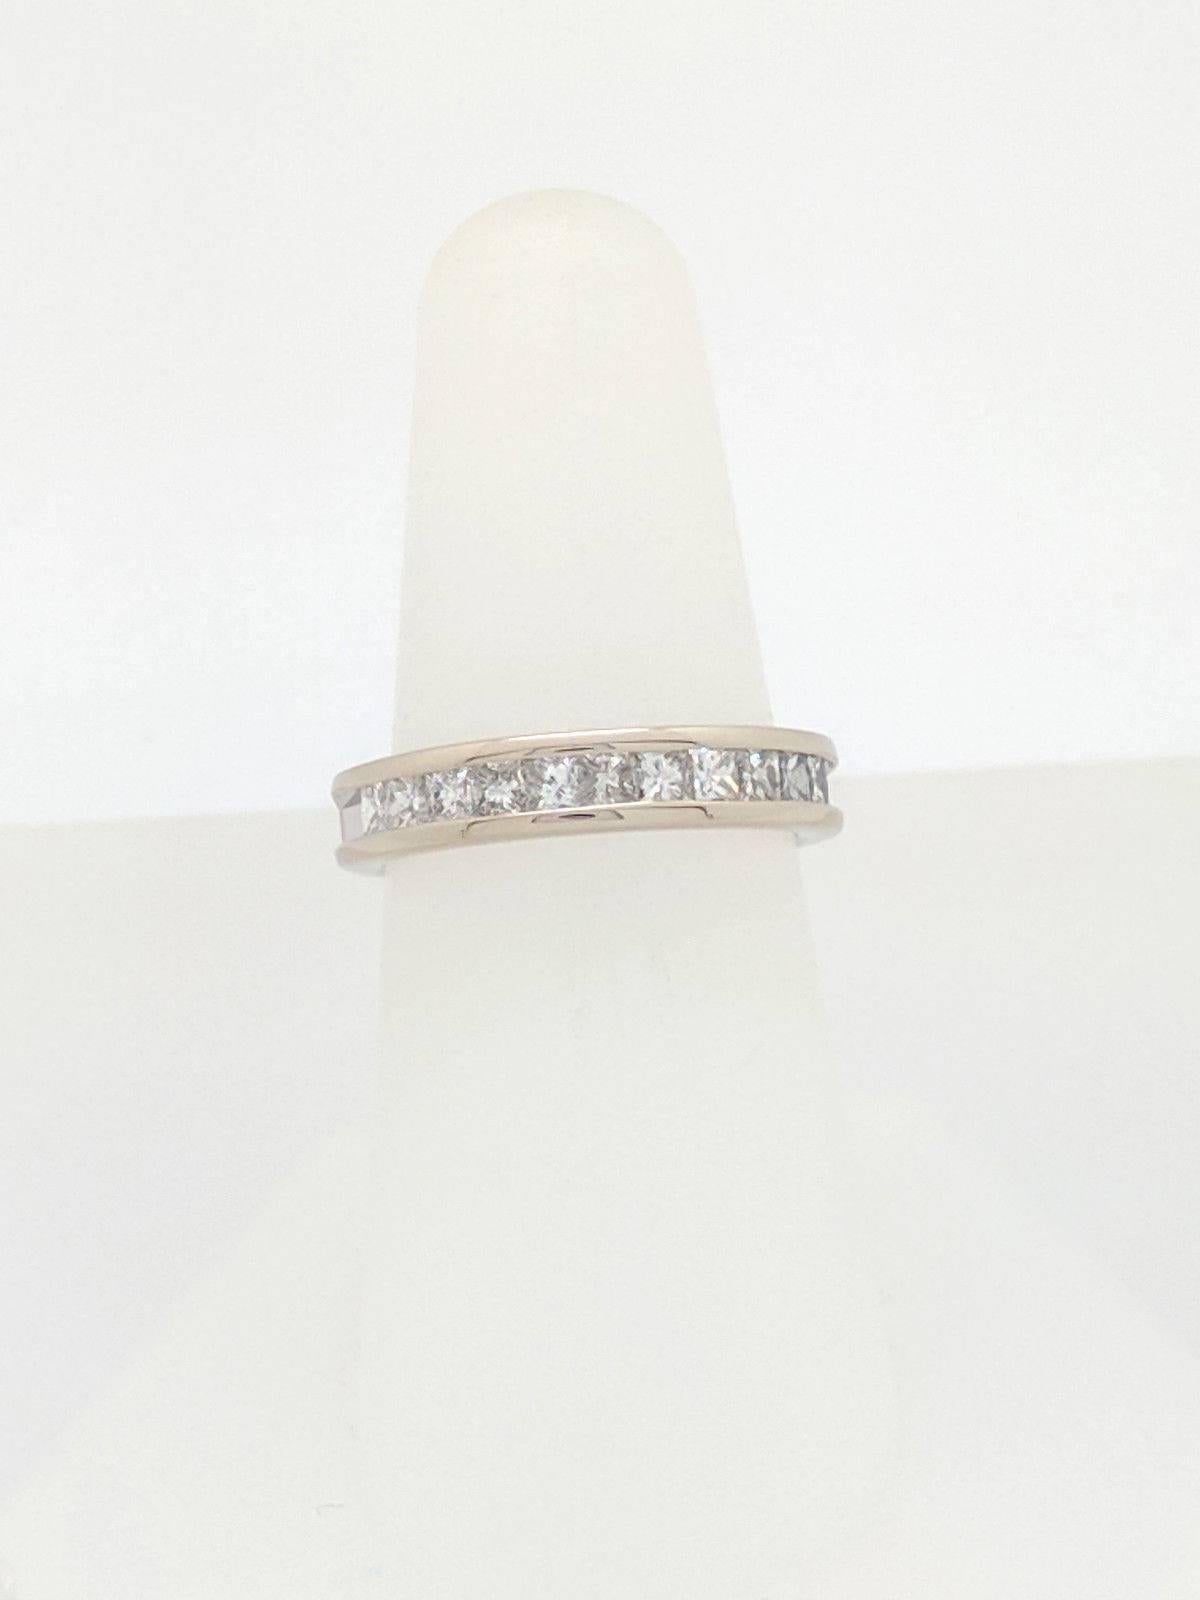 14K White Gold 1ctw Princess Cut Channel Set Diamond Wedding Band Ring Size 7

You are viewing a beautiful channel set diamond wedding band. This band is crafted from 14K white gold and weighs 4.5 grams. This ring features (11) natural princess cut